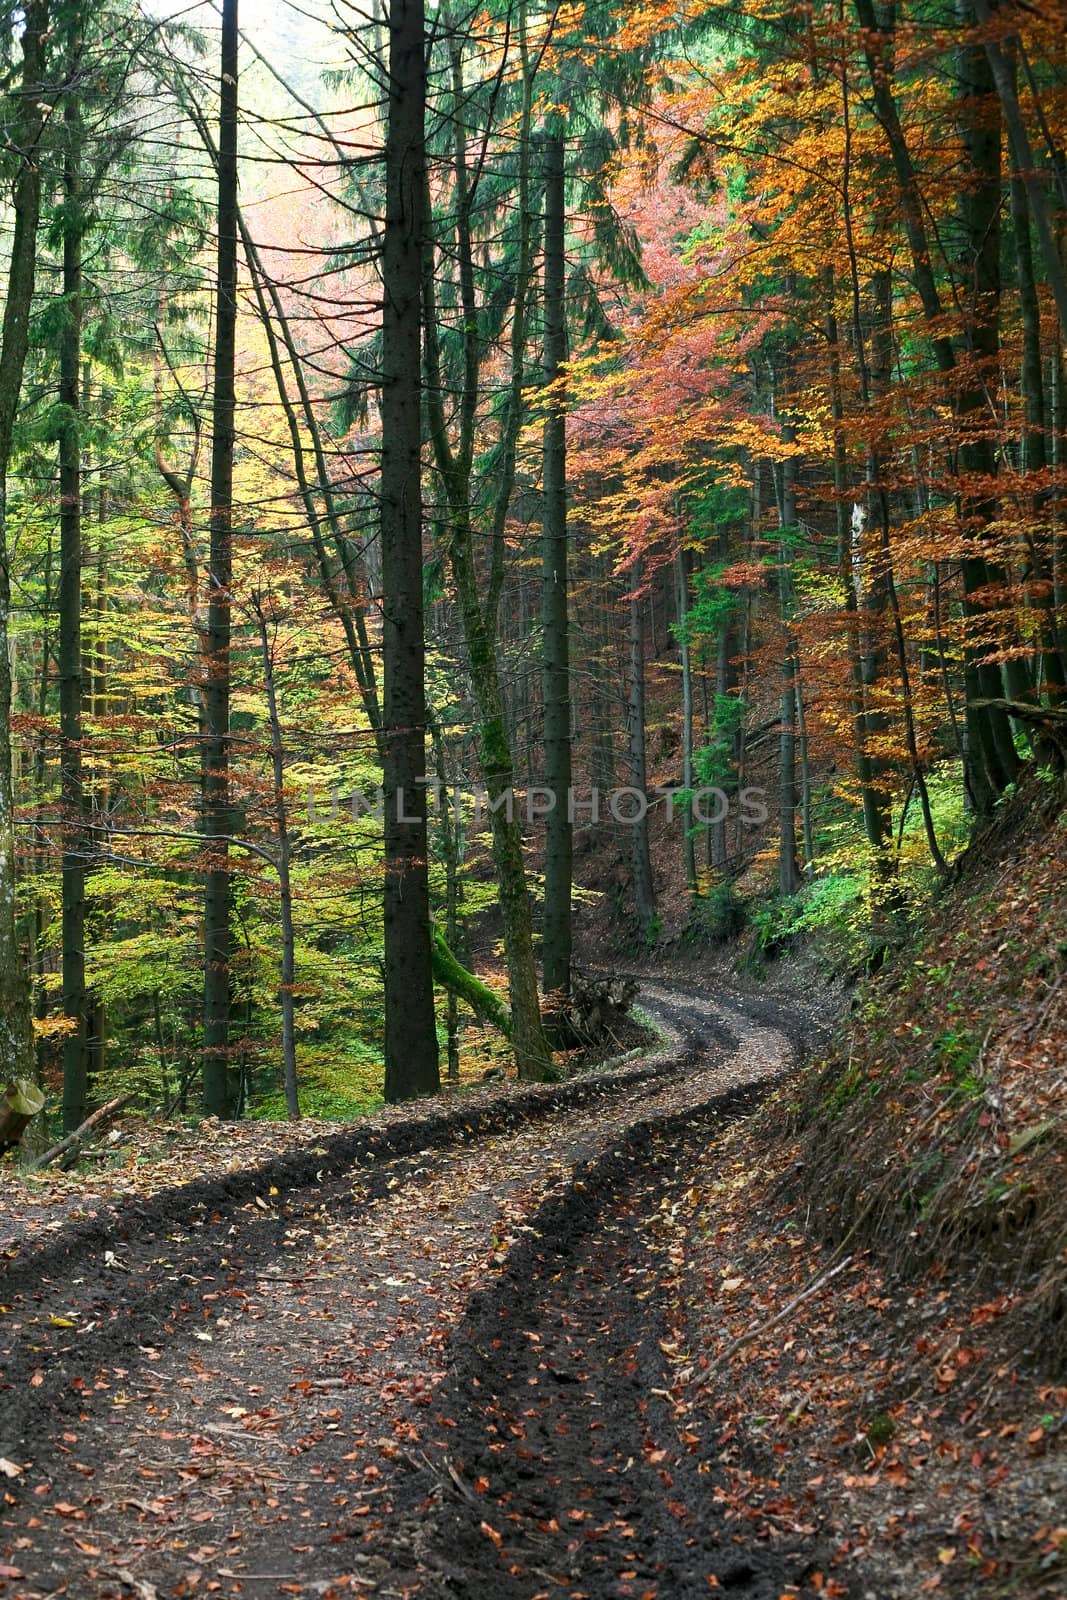 An image of lane in autumn forest